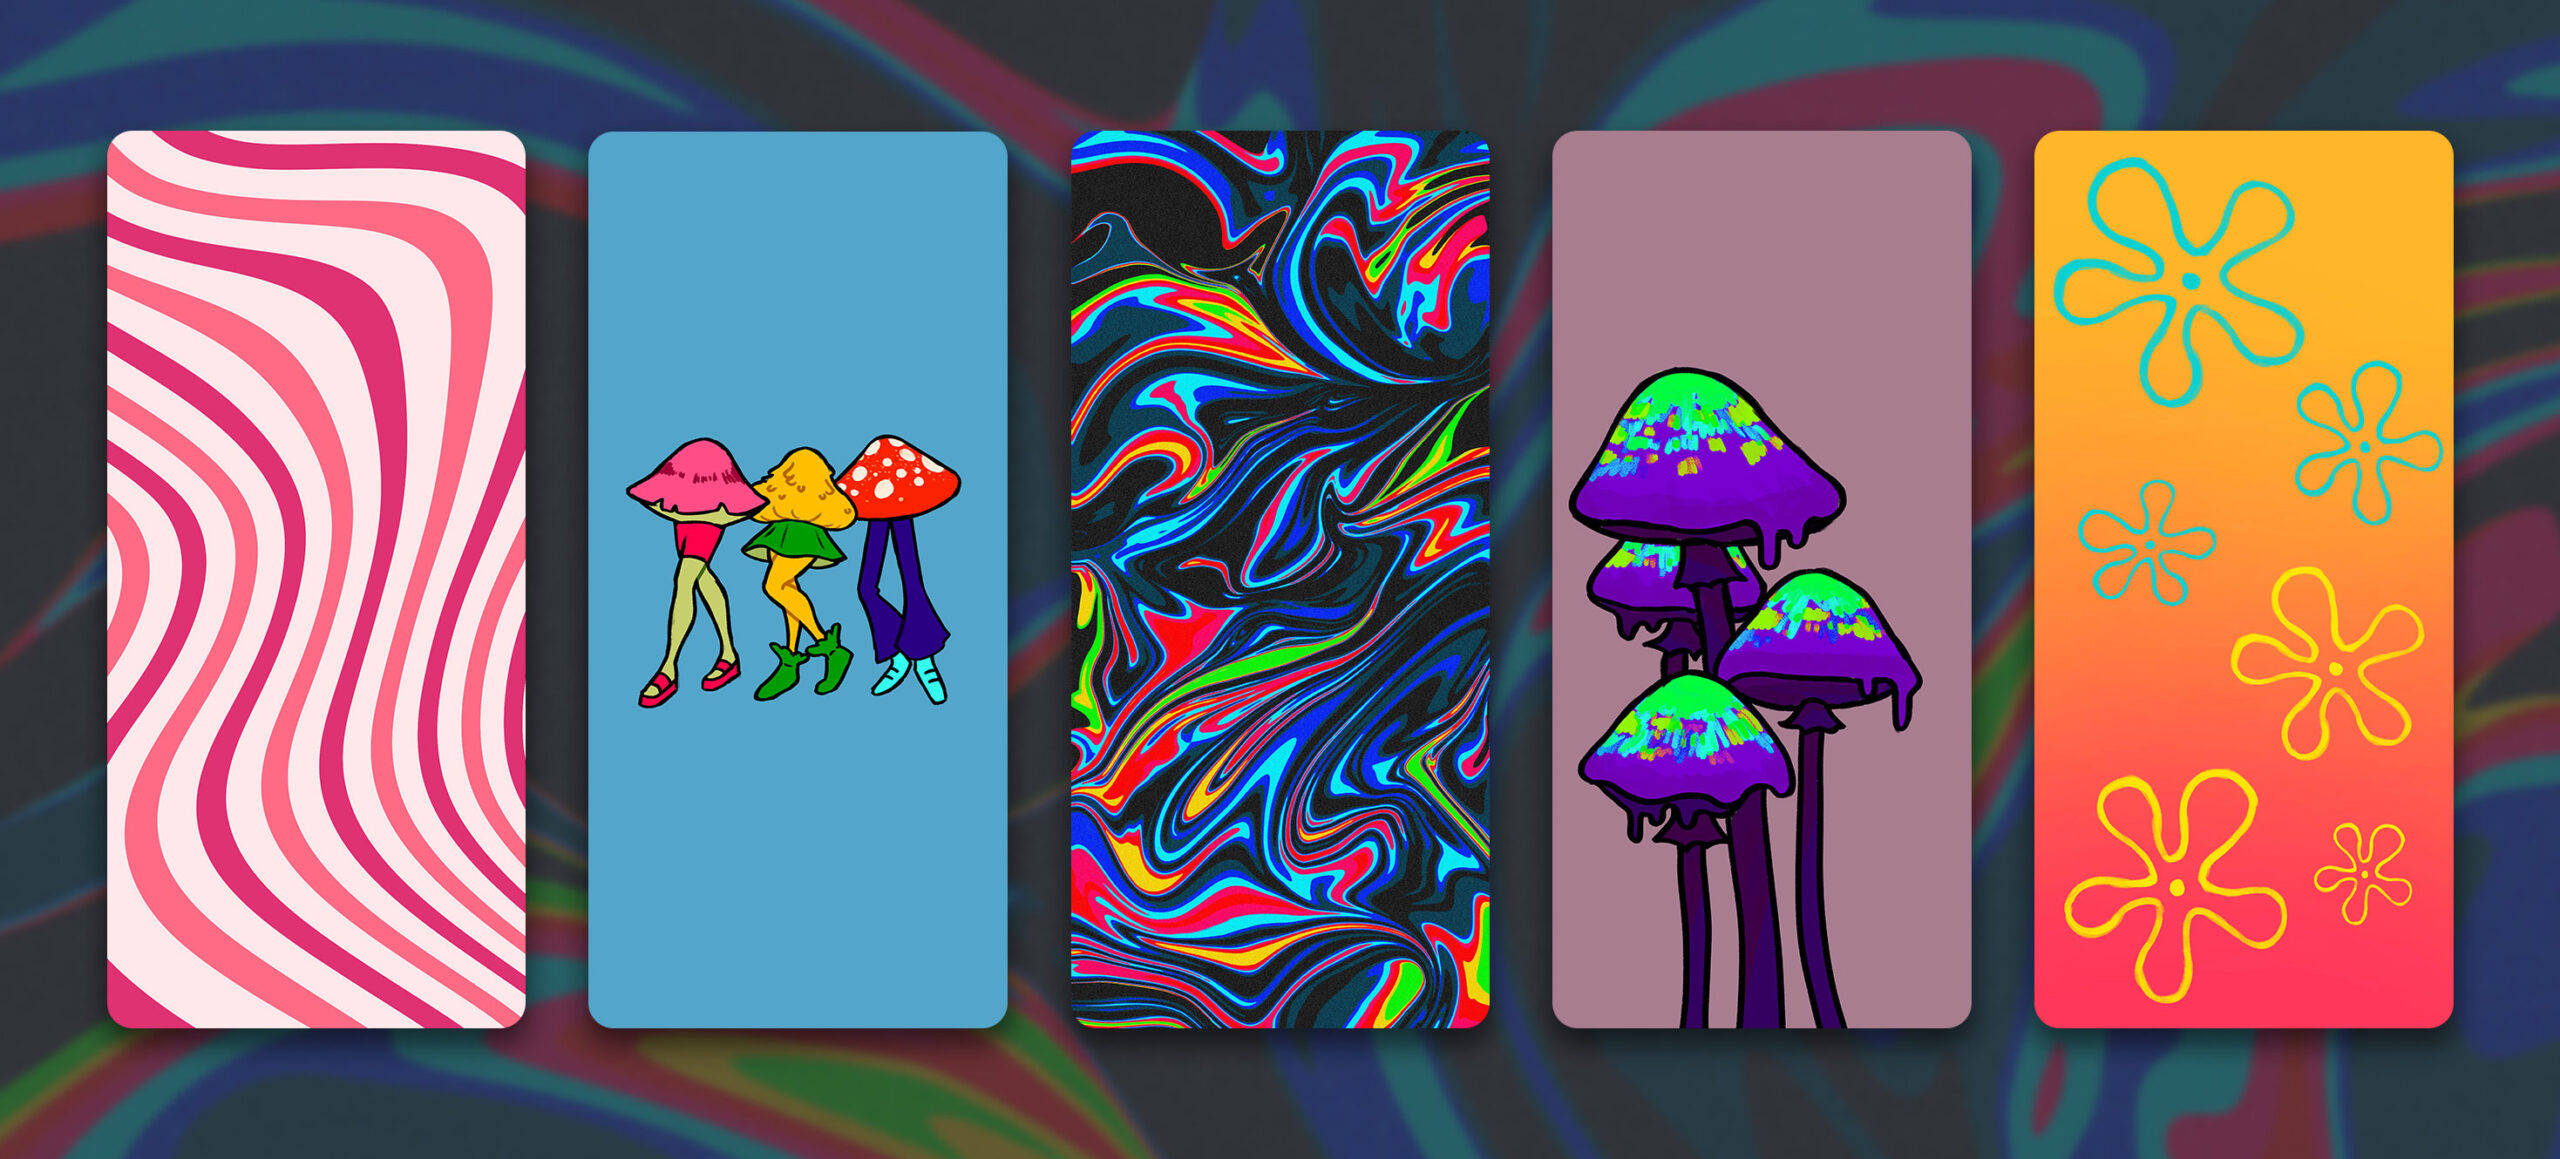 trippy wallpapers pack preview 6